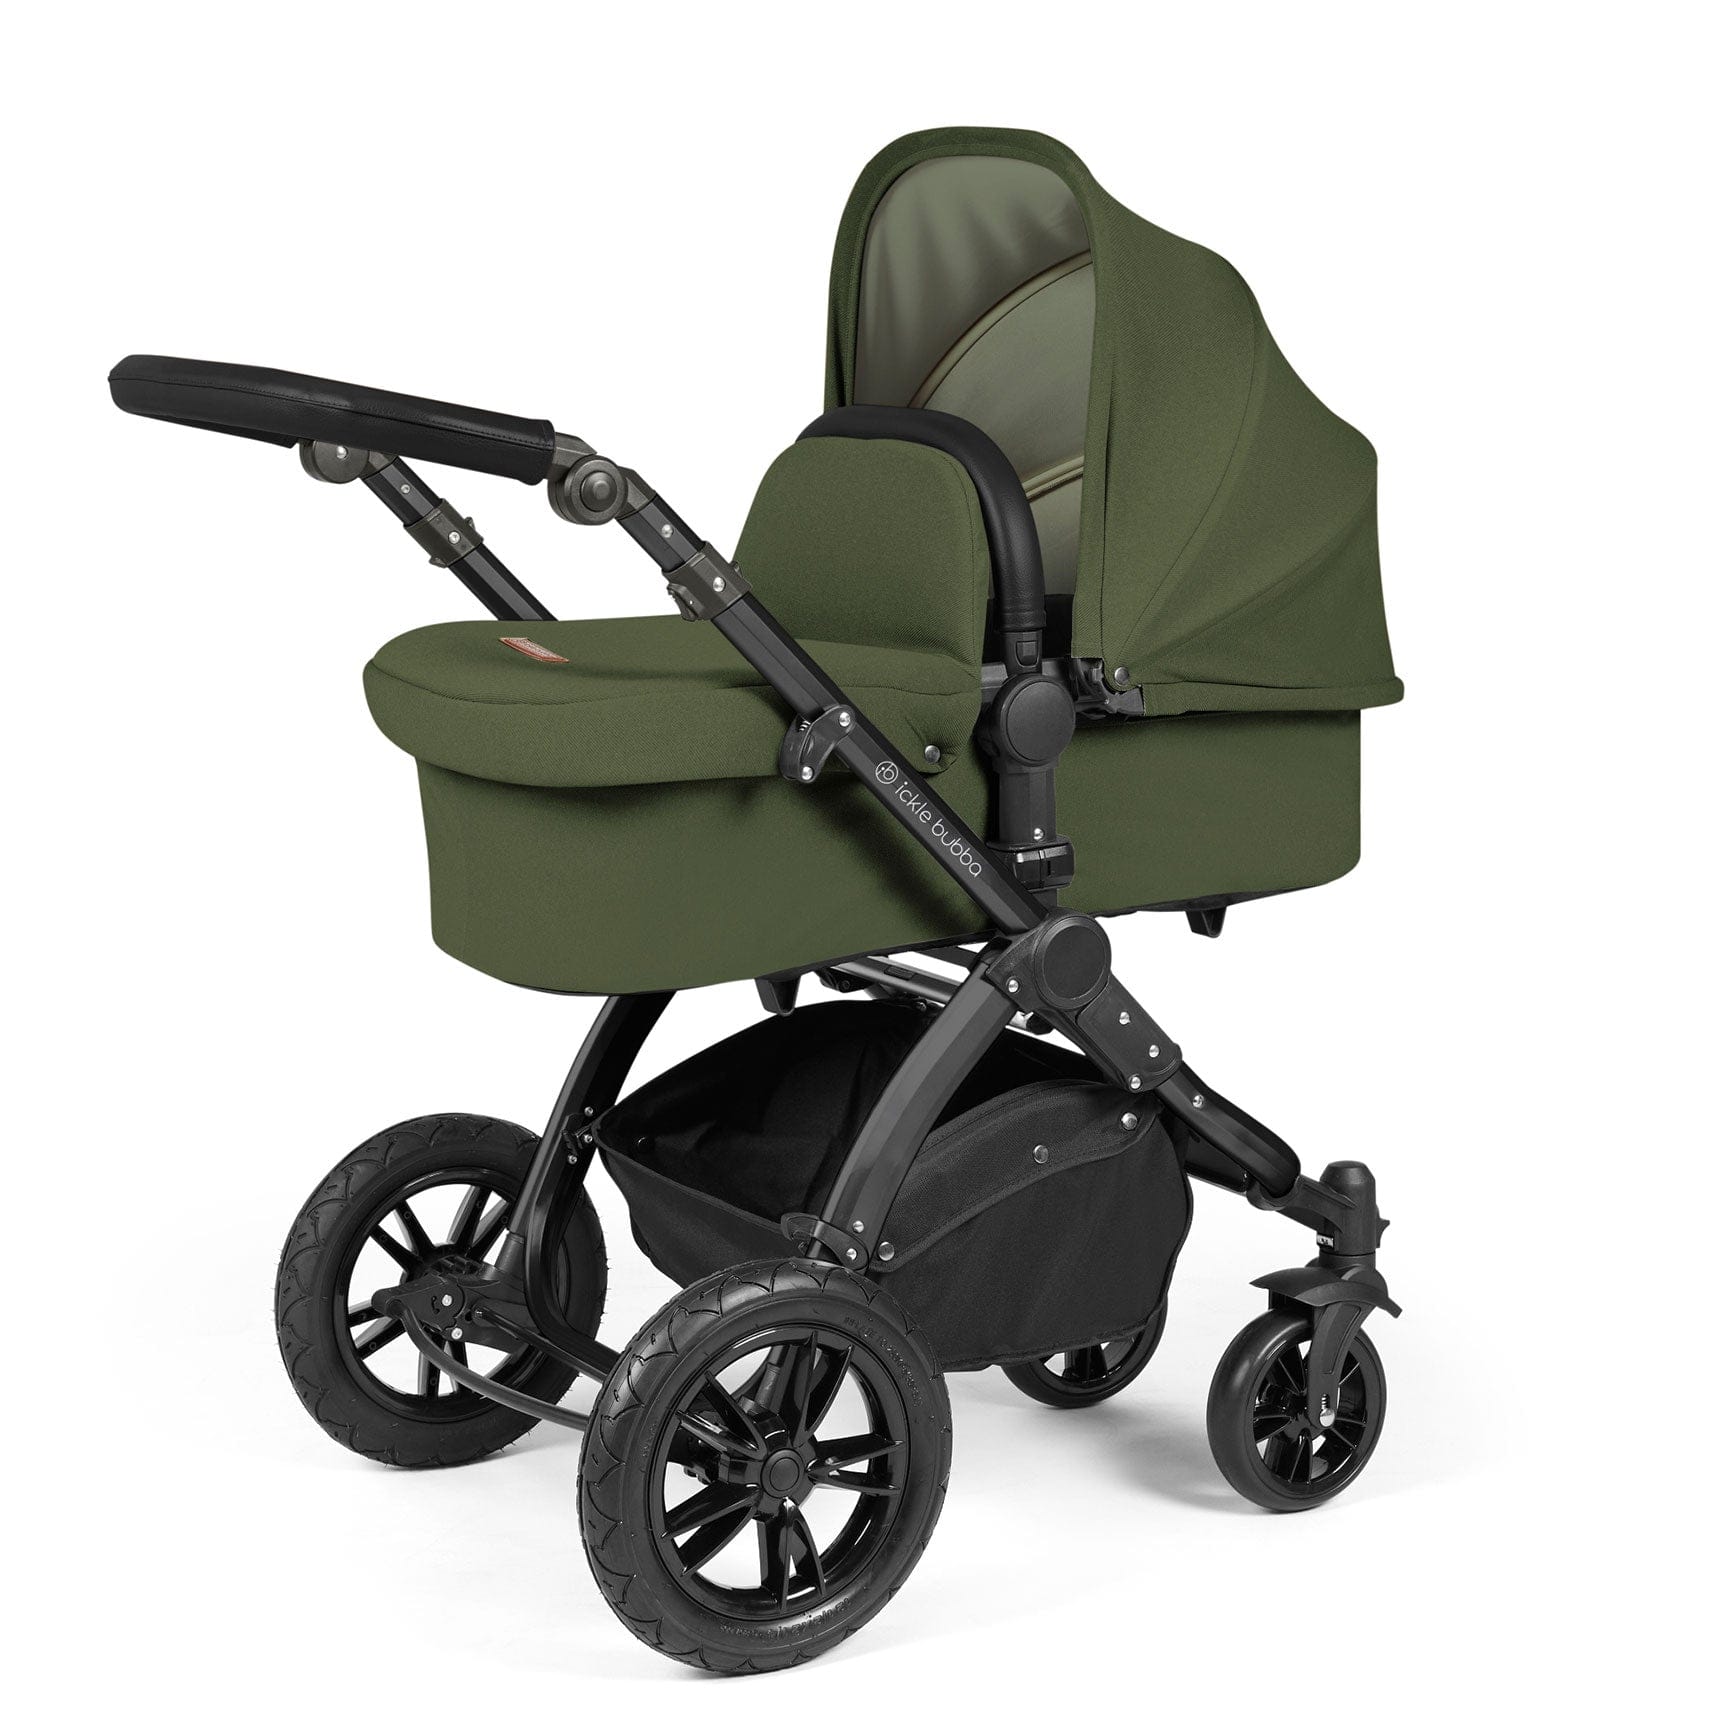 Ickle Bubba travel systems Ickle Bubba Stomp Luxe 2 in 1 Plus Pushchair & Carrycot - Black/Woodland/Black 10-003-001-138